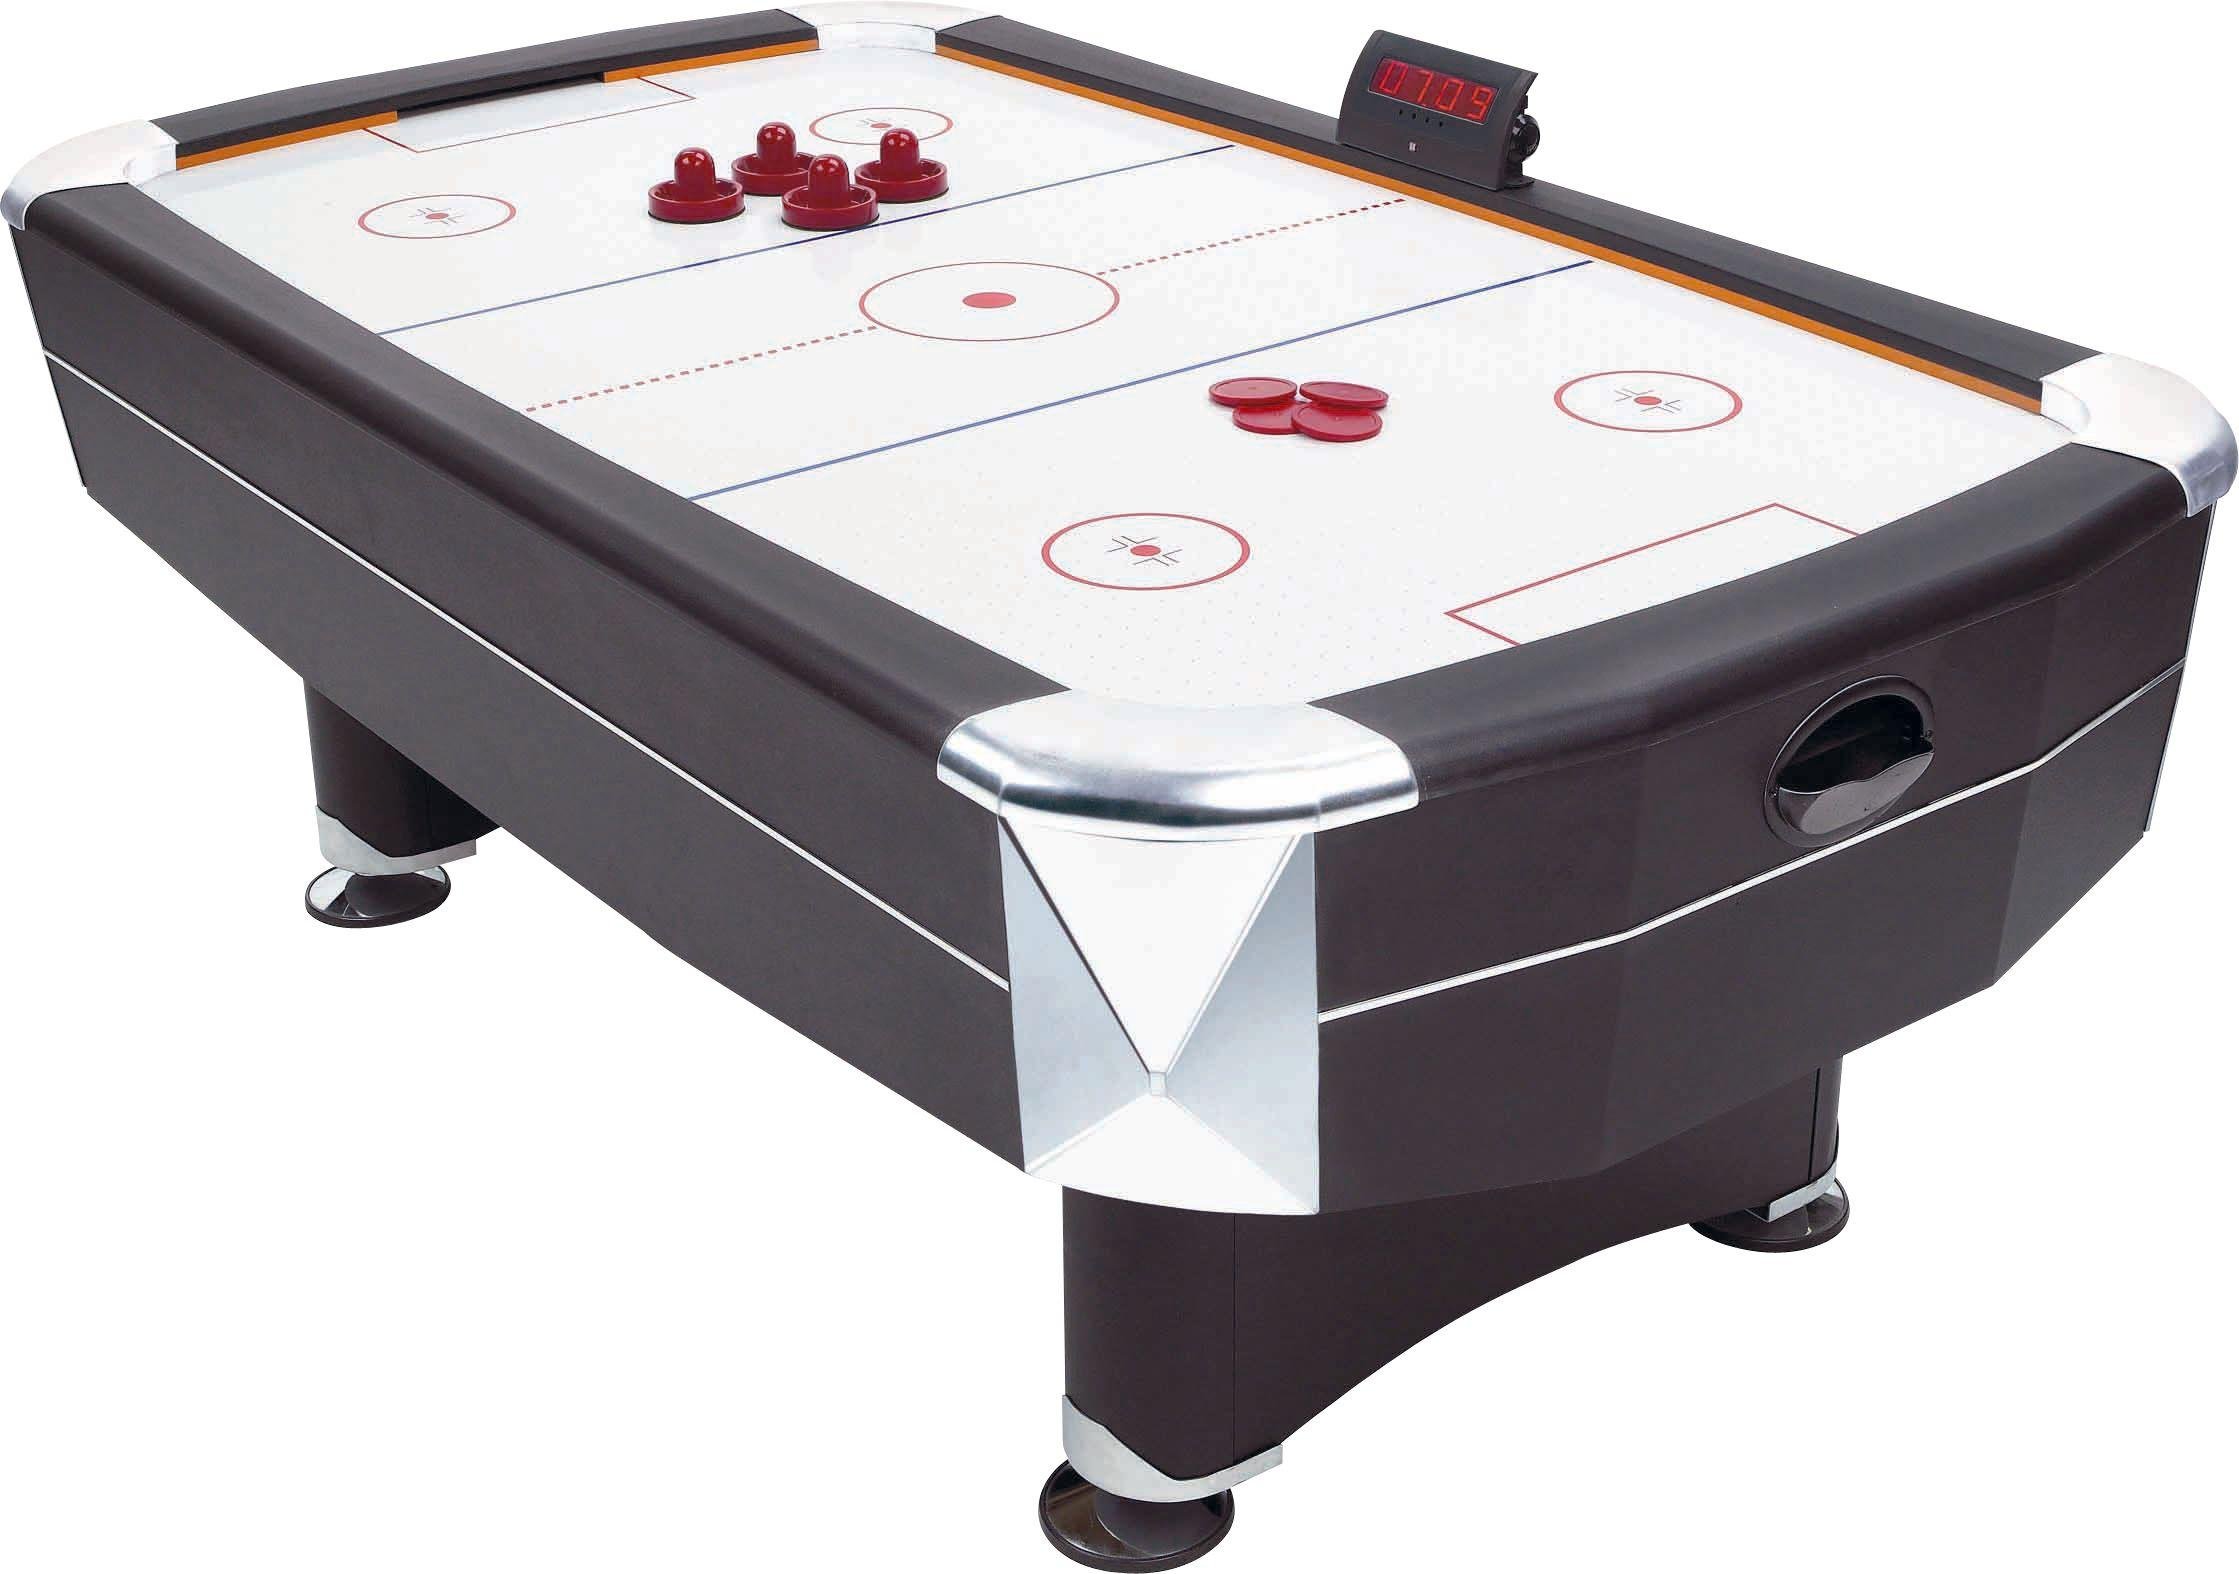 Vortex 7ft Air Hockey Games Table. Review